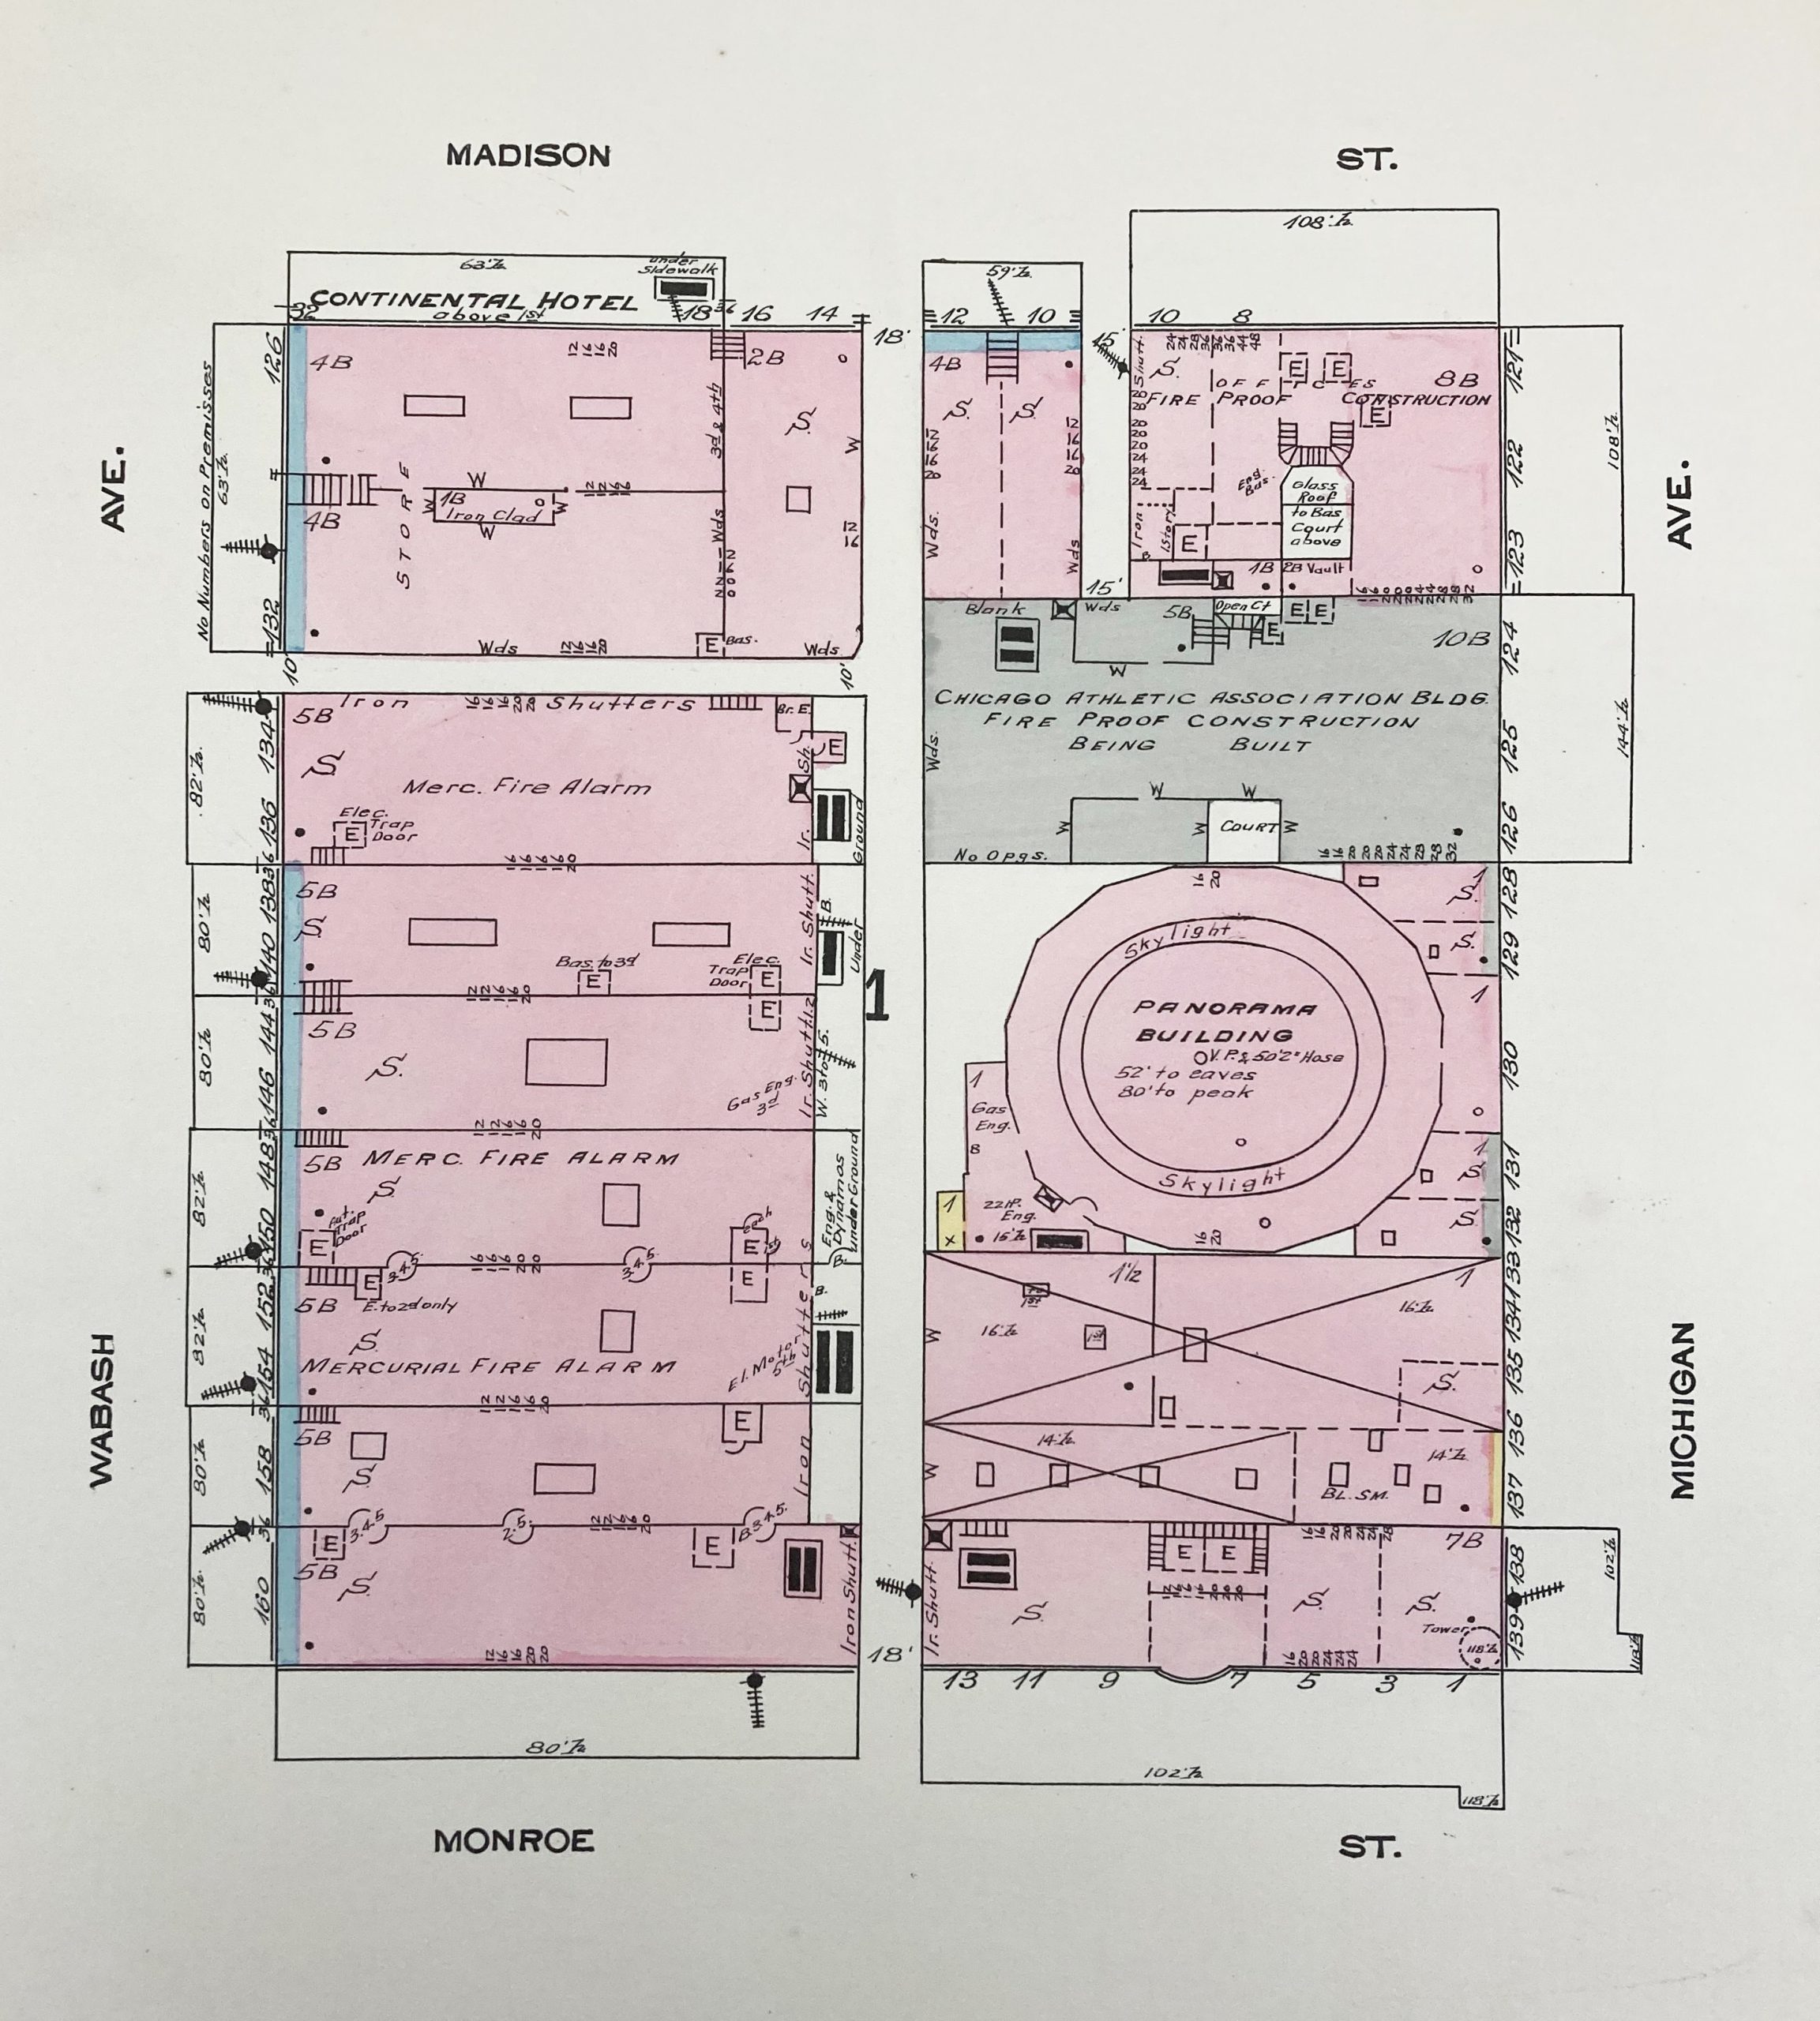 Fire insurance block map from 1893 that shows site of the Fire Cyclorama building, listed as Panorama Building